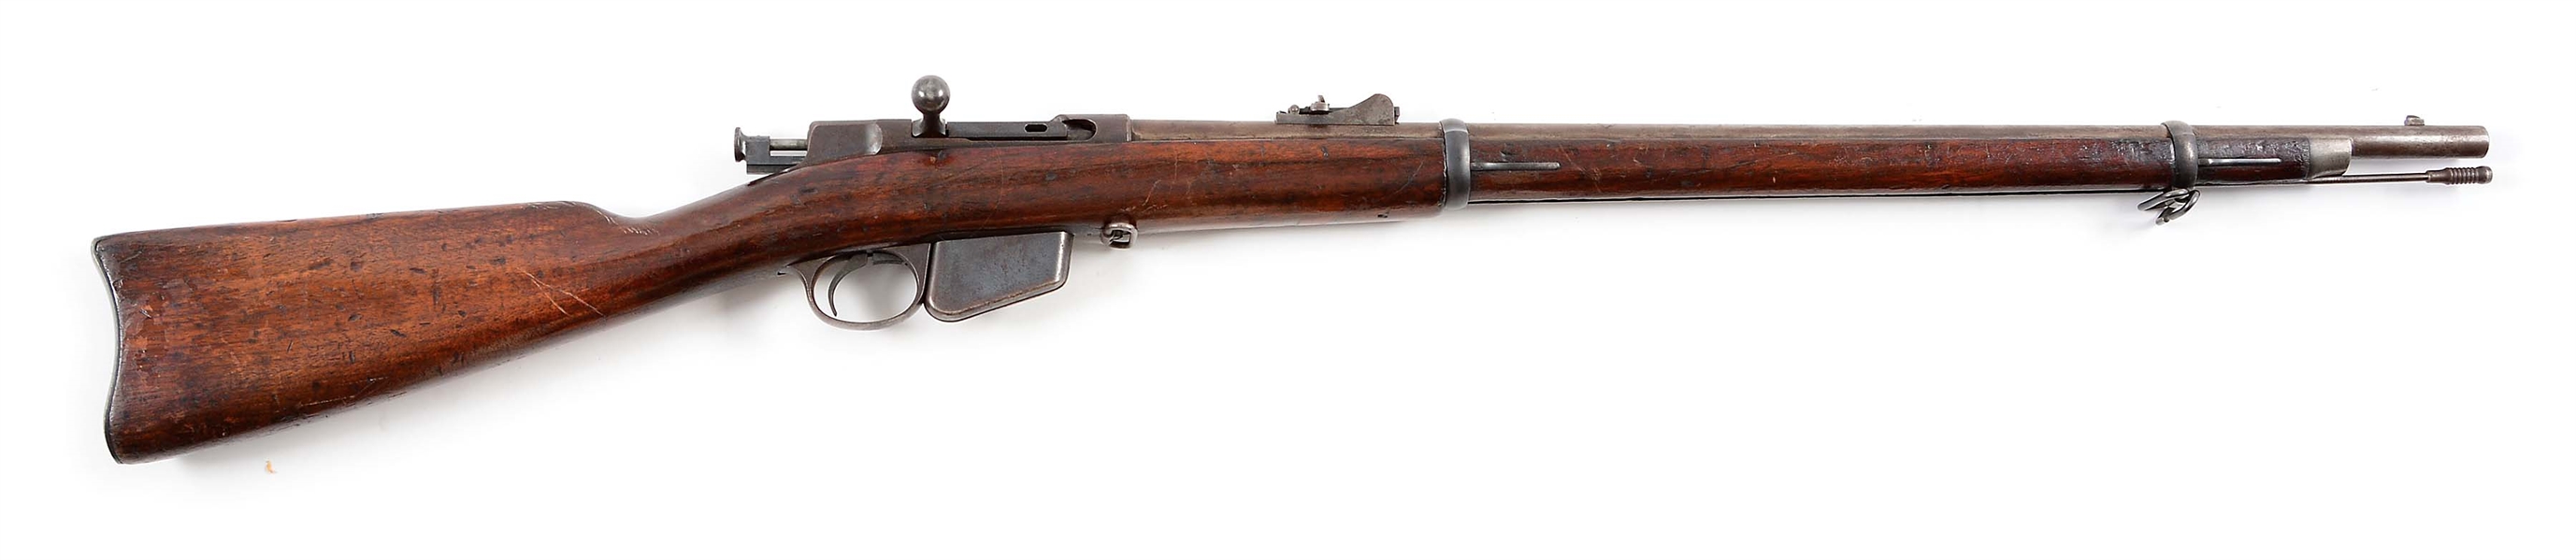 (A) RARE & EARLY SHARPS-REMINGTON-LEE MODEL 1879 U.S. NAVY BOLT ACTION RIFLE WITH SHARPS ACTION, SERIAL NO. 42.